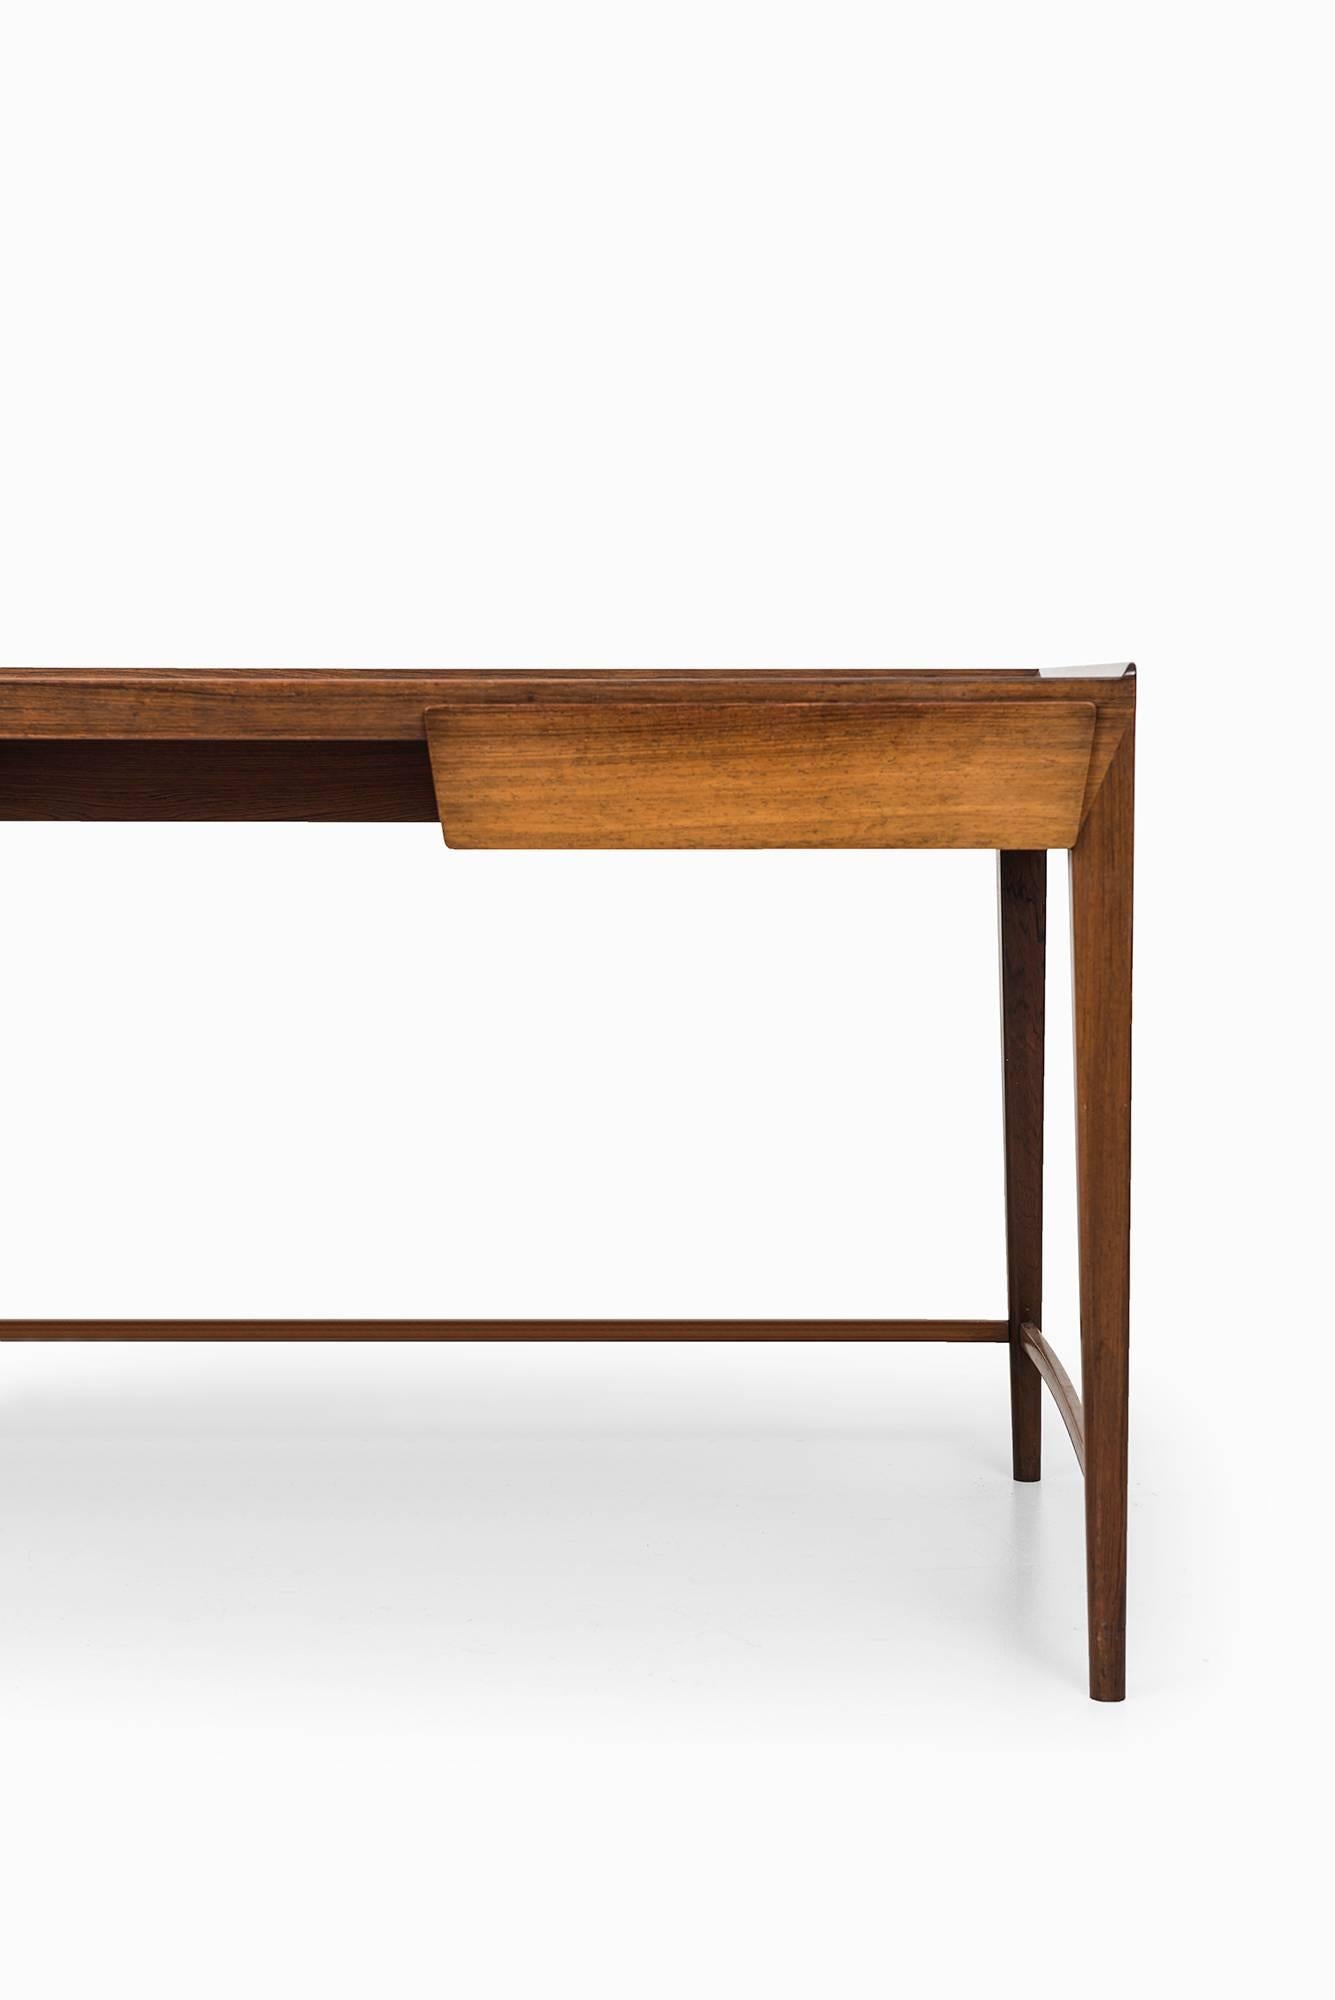 Rare desk designed by Frode Holm. Produced by Illums Bolighus in Denmark